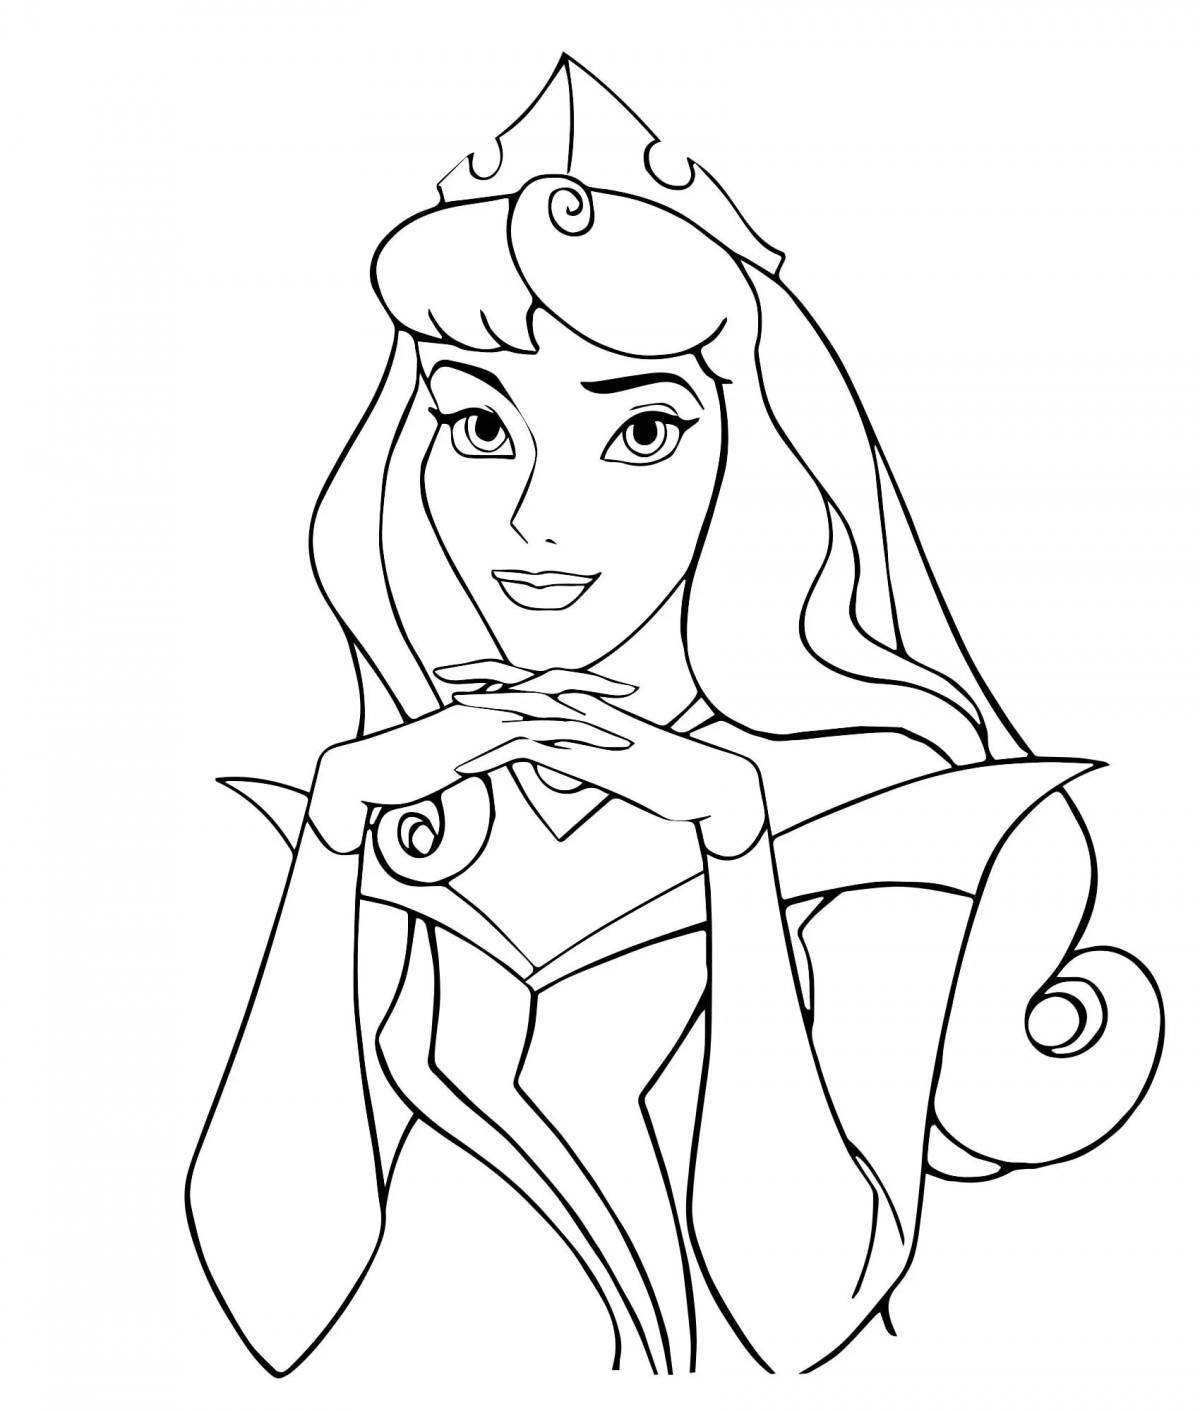 Sleeping beauty coloring book for kids